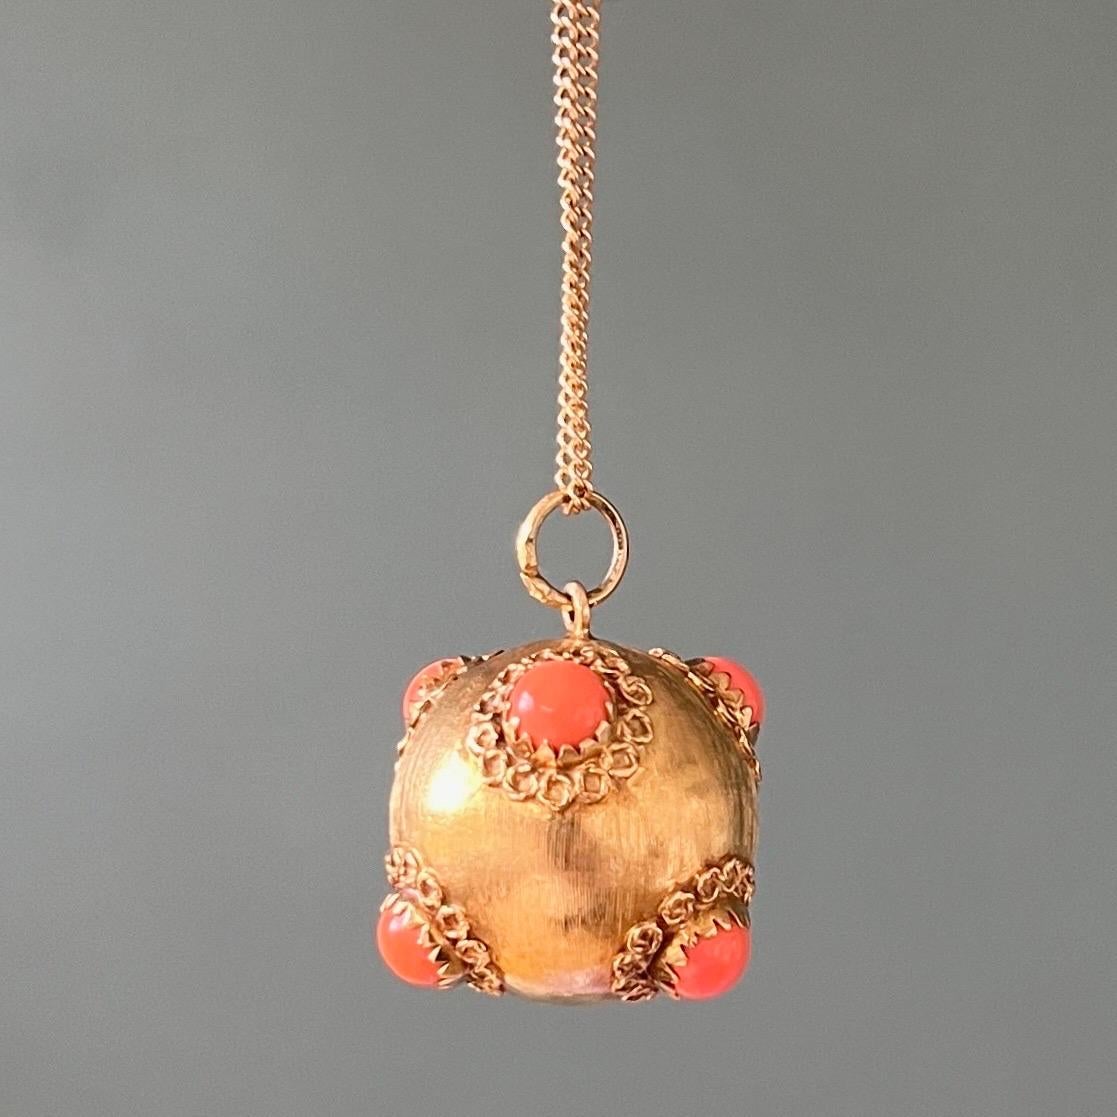 A beautiful large and heavy 18 karat gold Venetian Etruscan fob charm pendant in the shape of a ball or also called sputnik. This Italian charm is set with six precious cabochon cut coral stones, while the gold surface is decorated with filigree,